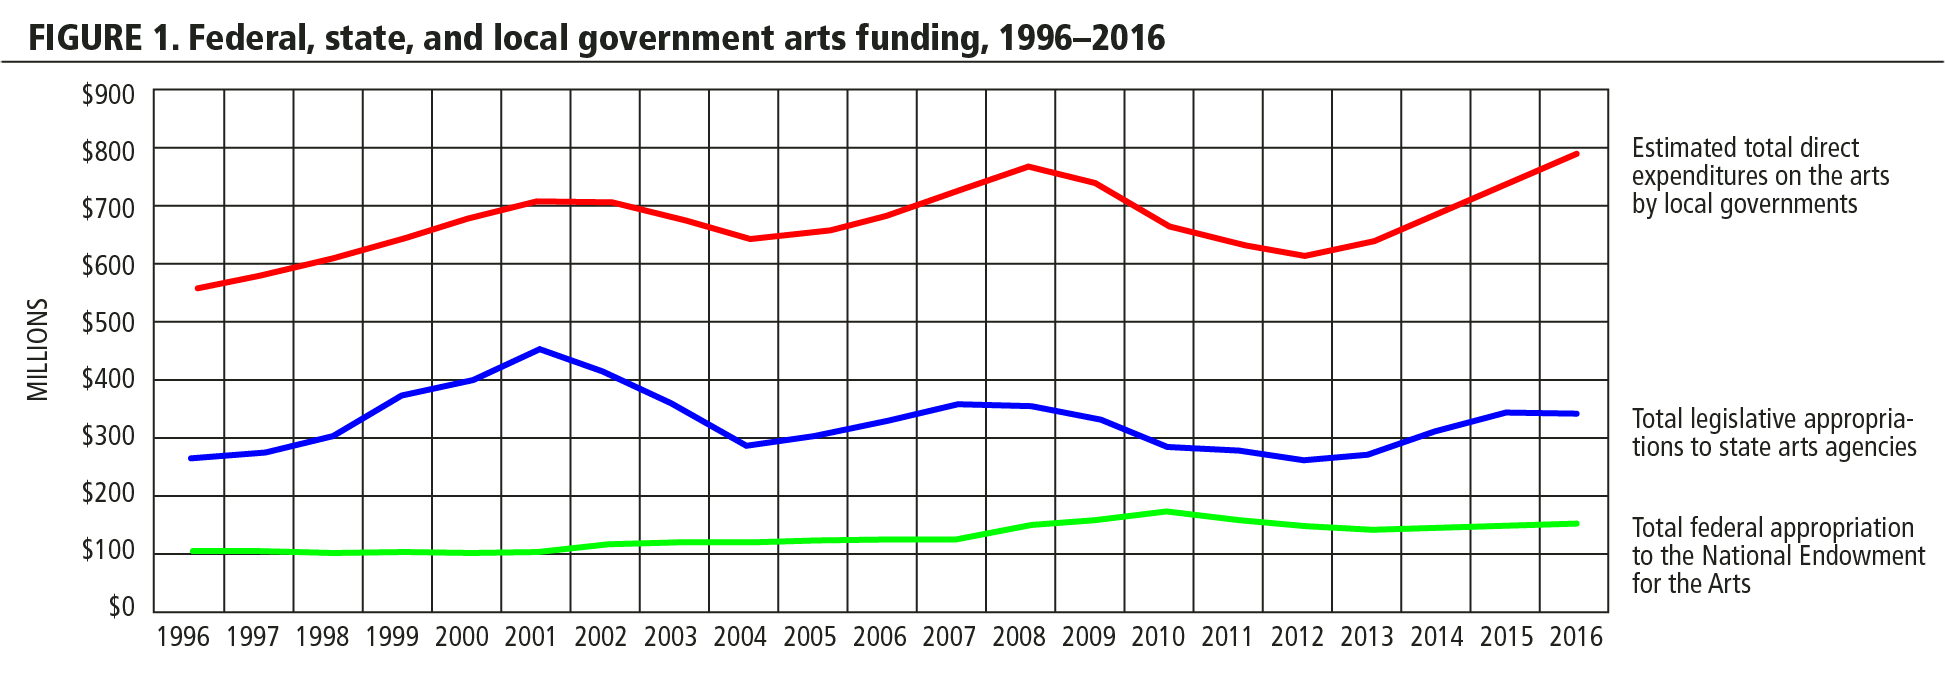 FIGURE 1. Federal, state, and local government arts funding, 1996-2016